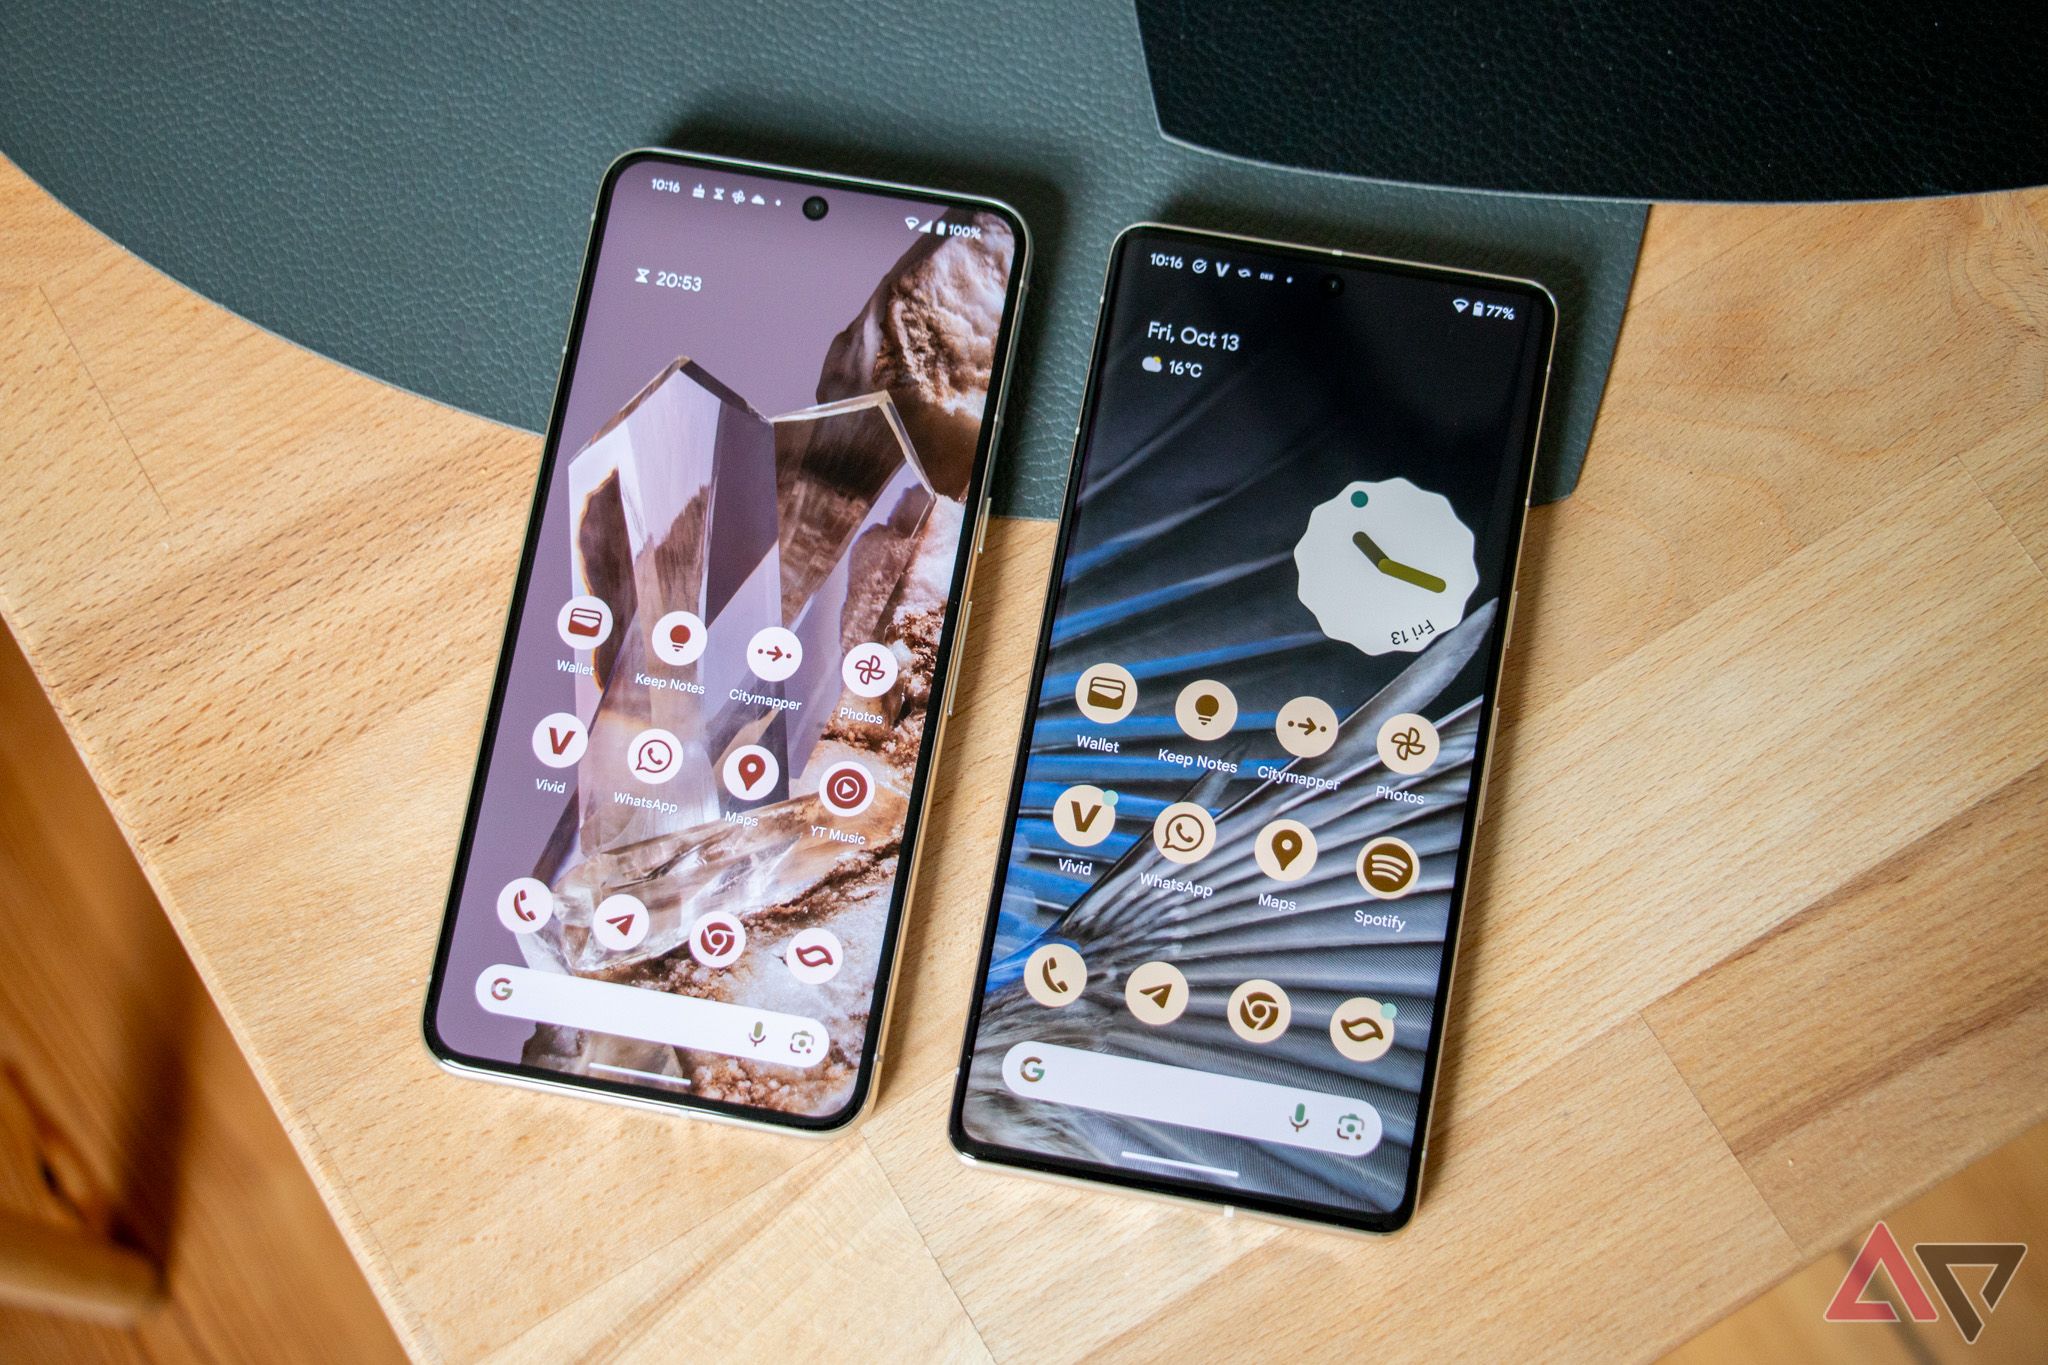 The Pixel 8 Pro next to a Pixel 7 Pro with both phones on their home screens.